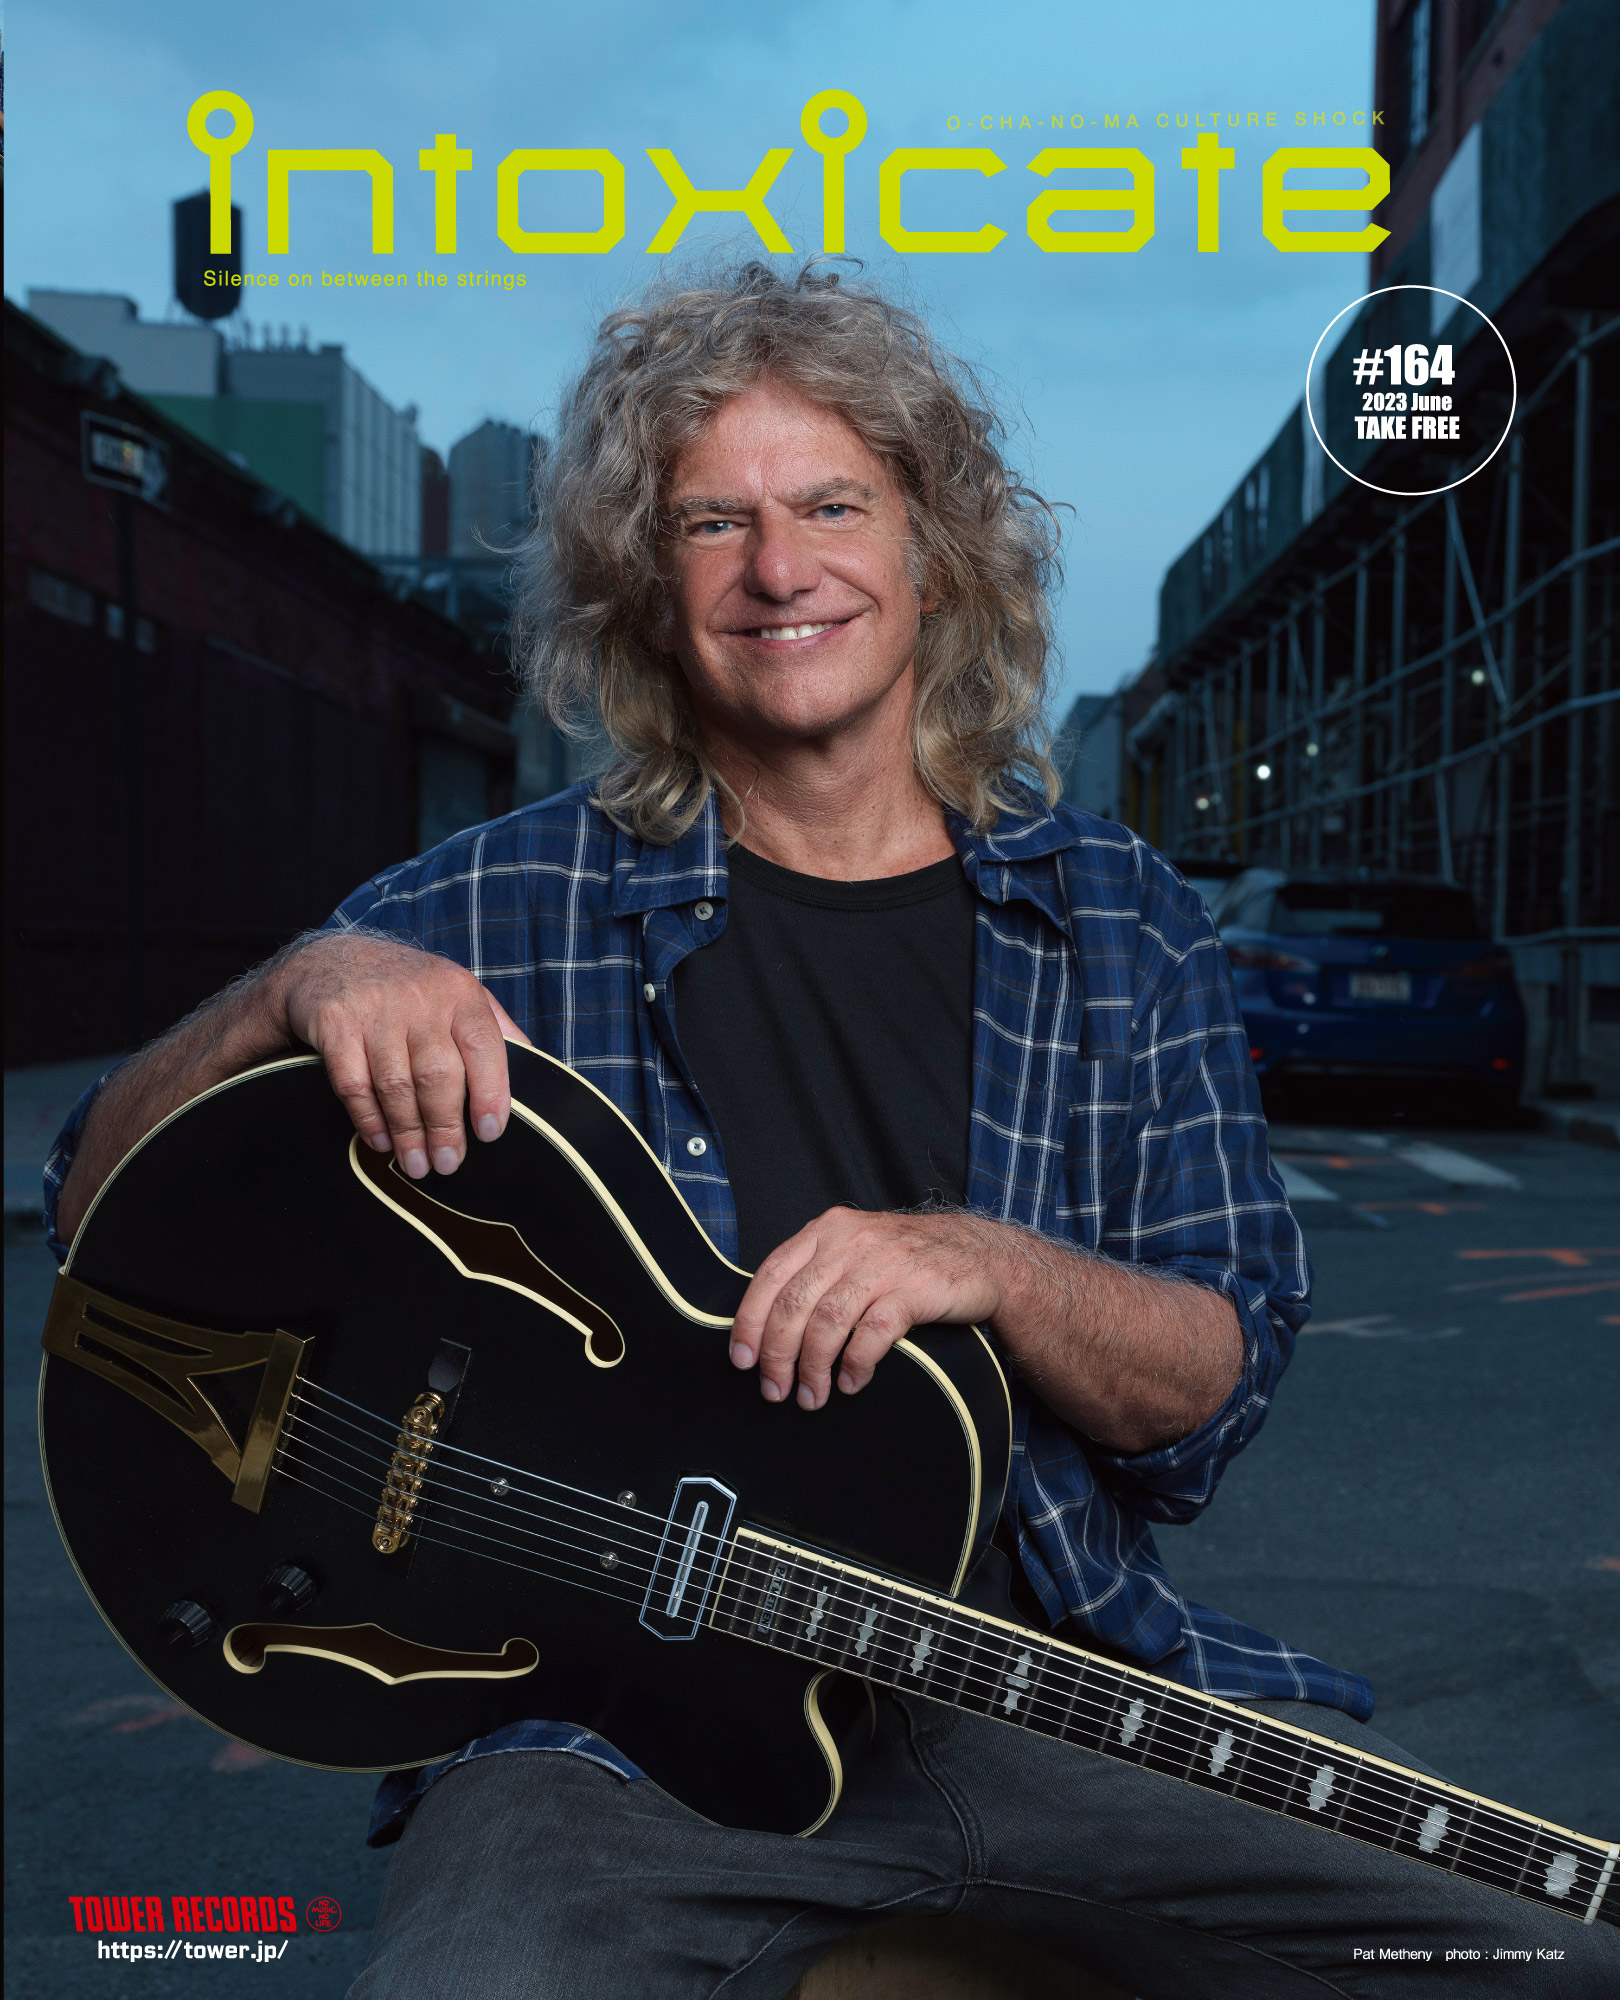 Intoxicate vol. 164 features Pat Metheny, Suntory Hall Summer Festival, Chihiro Yamanaka on Rhapsody in Red, TESTEST